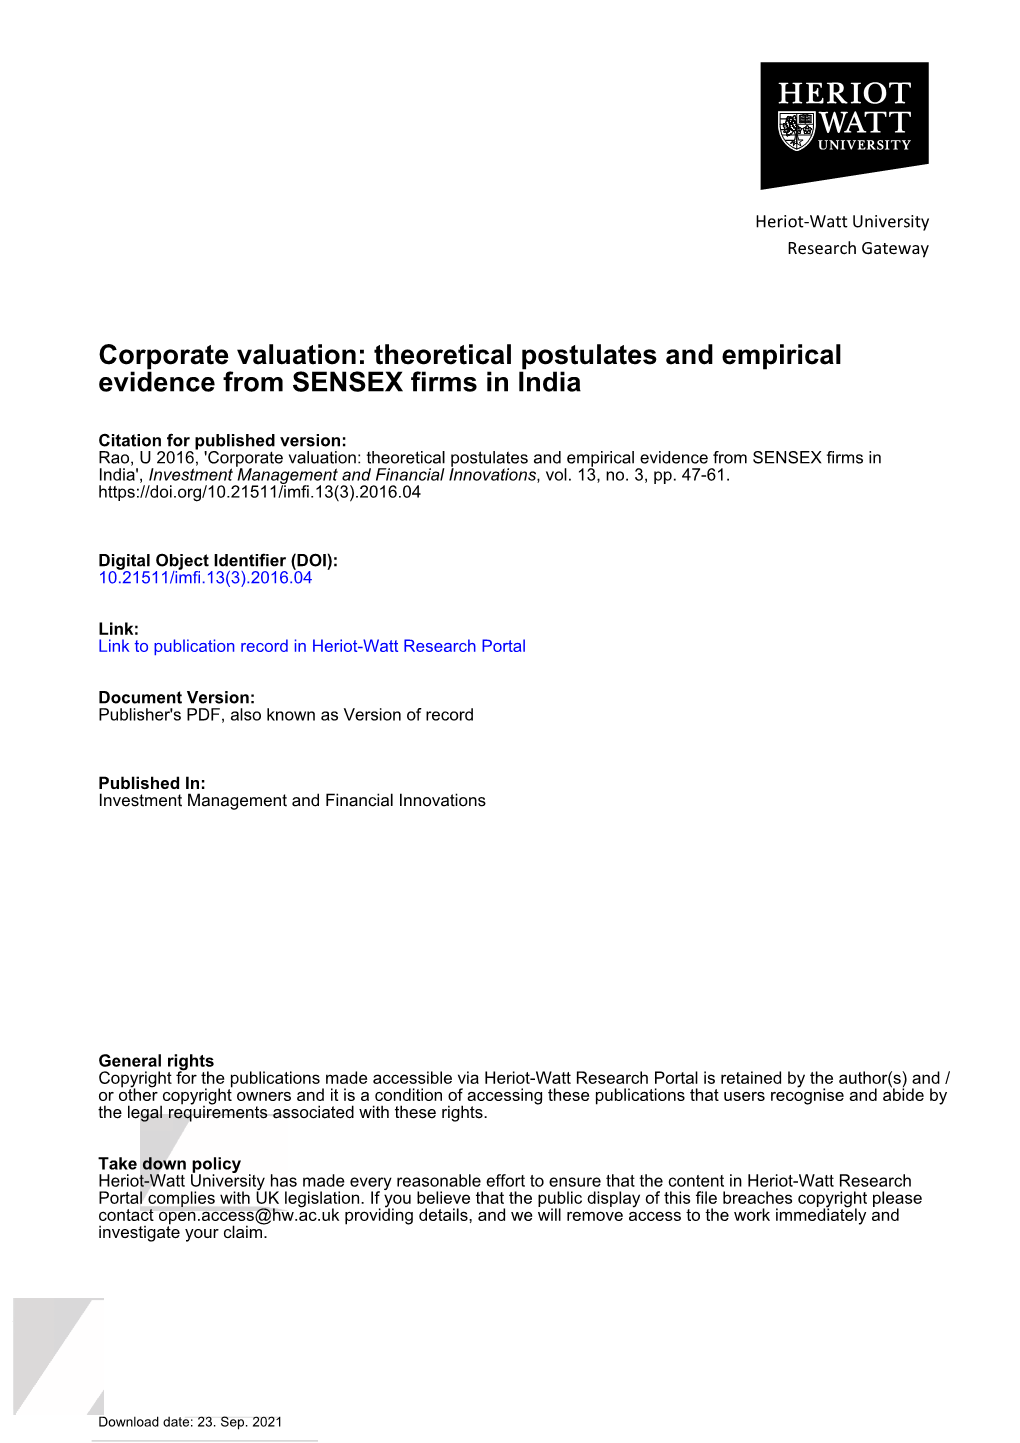 Corporate Valuation: Theoretical Postulates and Empirical Evidence from SENSEX Firms in India